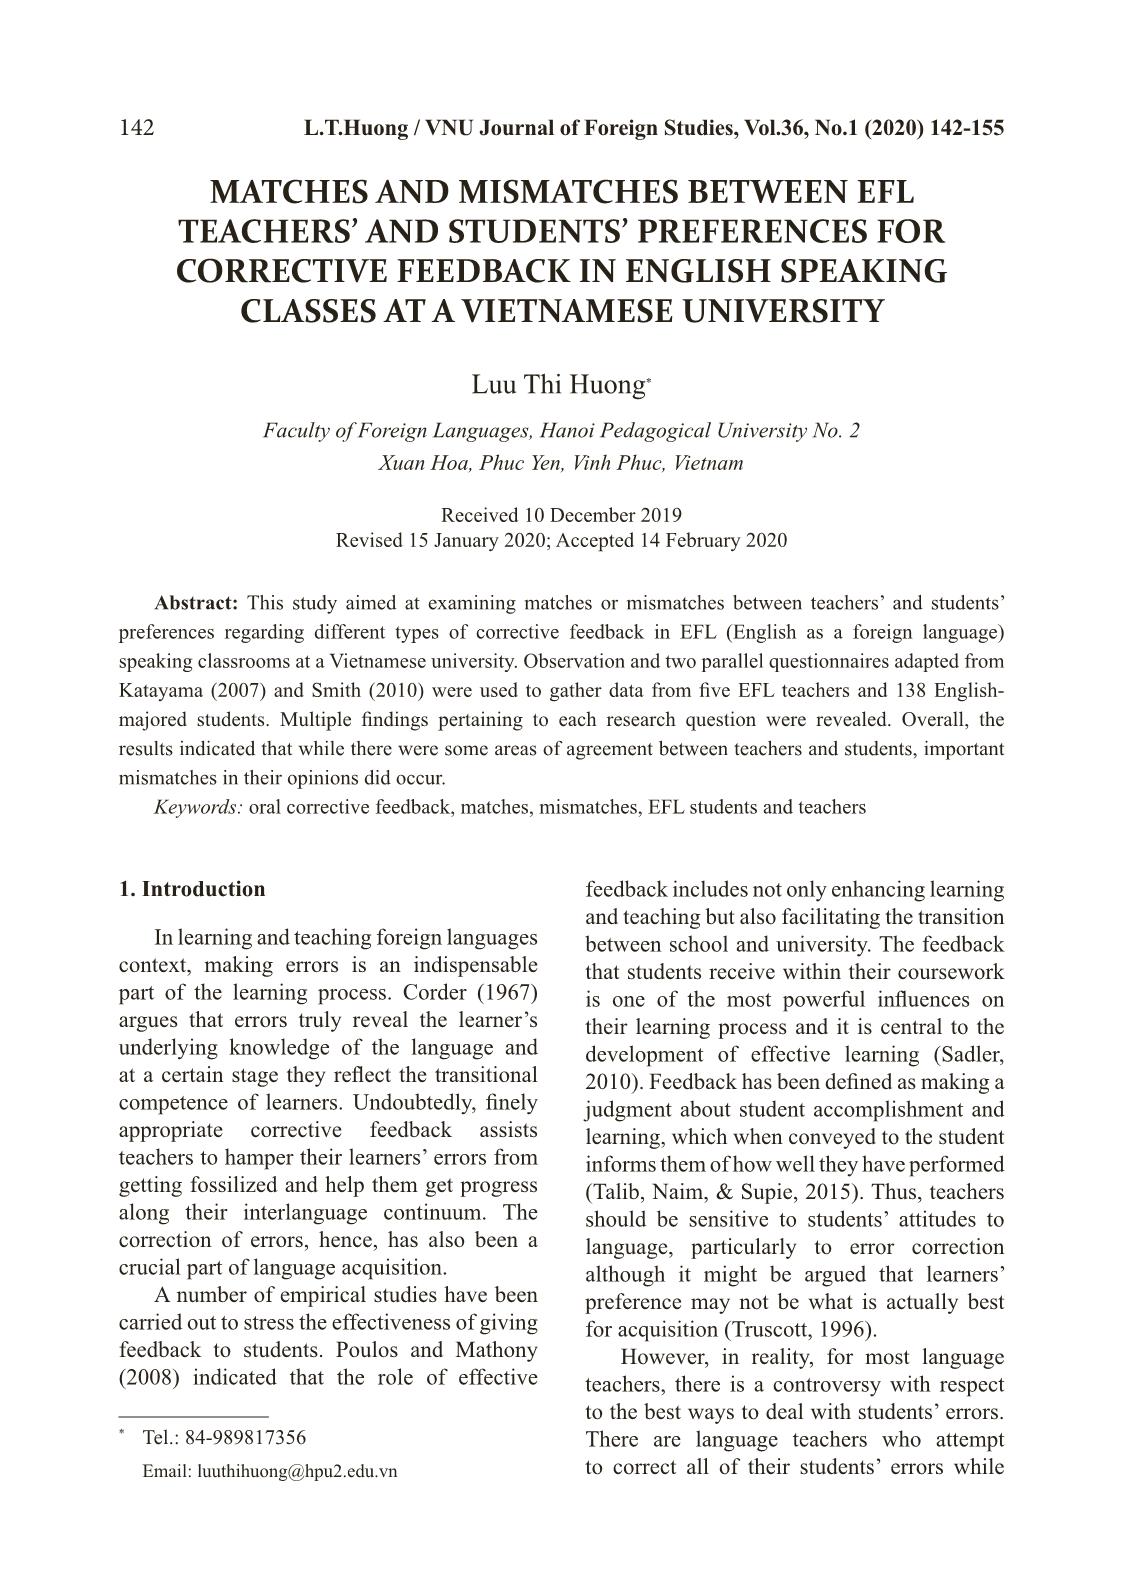 Matches and mismatches between EFL teachers’ and students’ preferences for corrective feedback in English speaking classes at a Vietnamese University trang 1